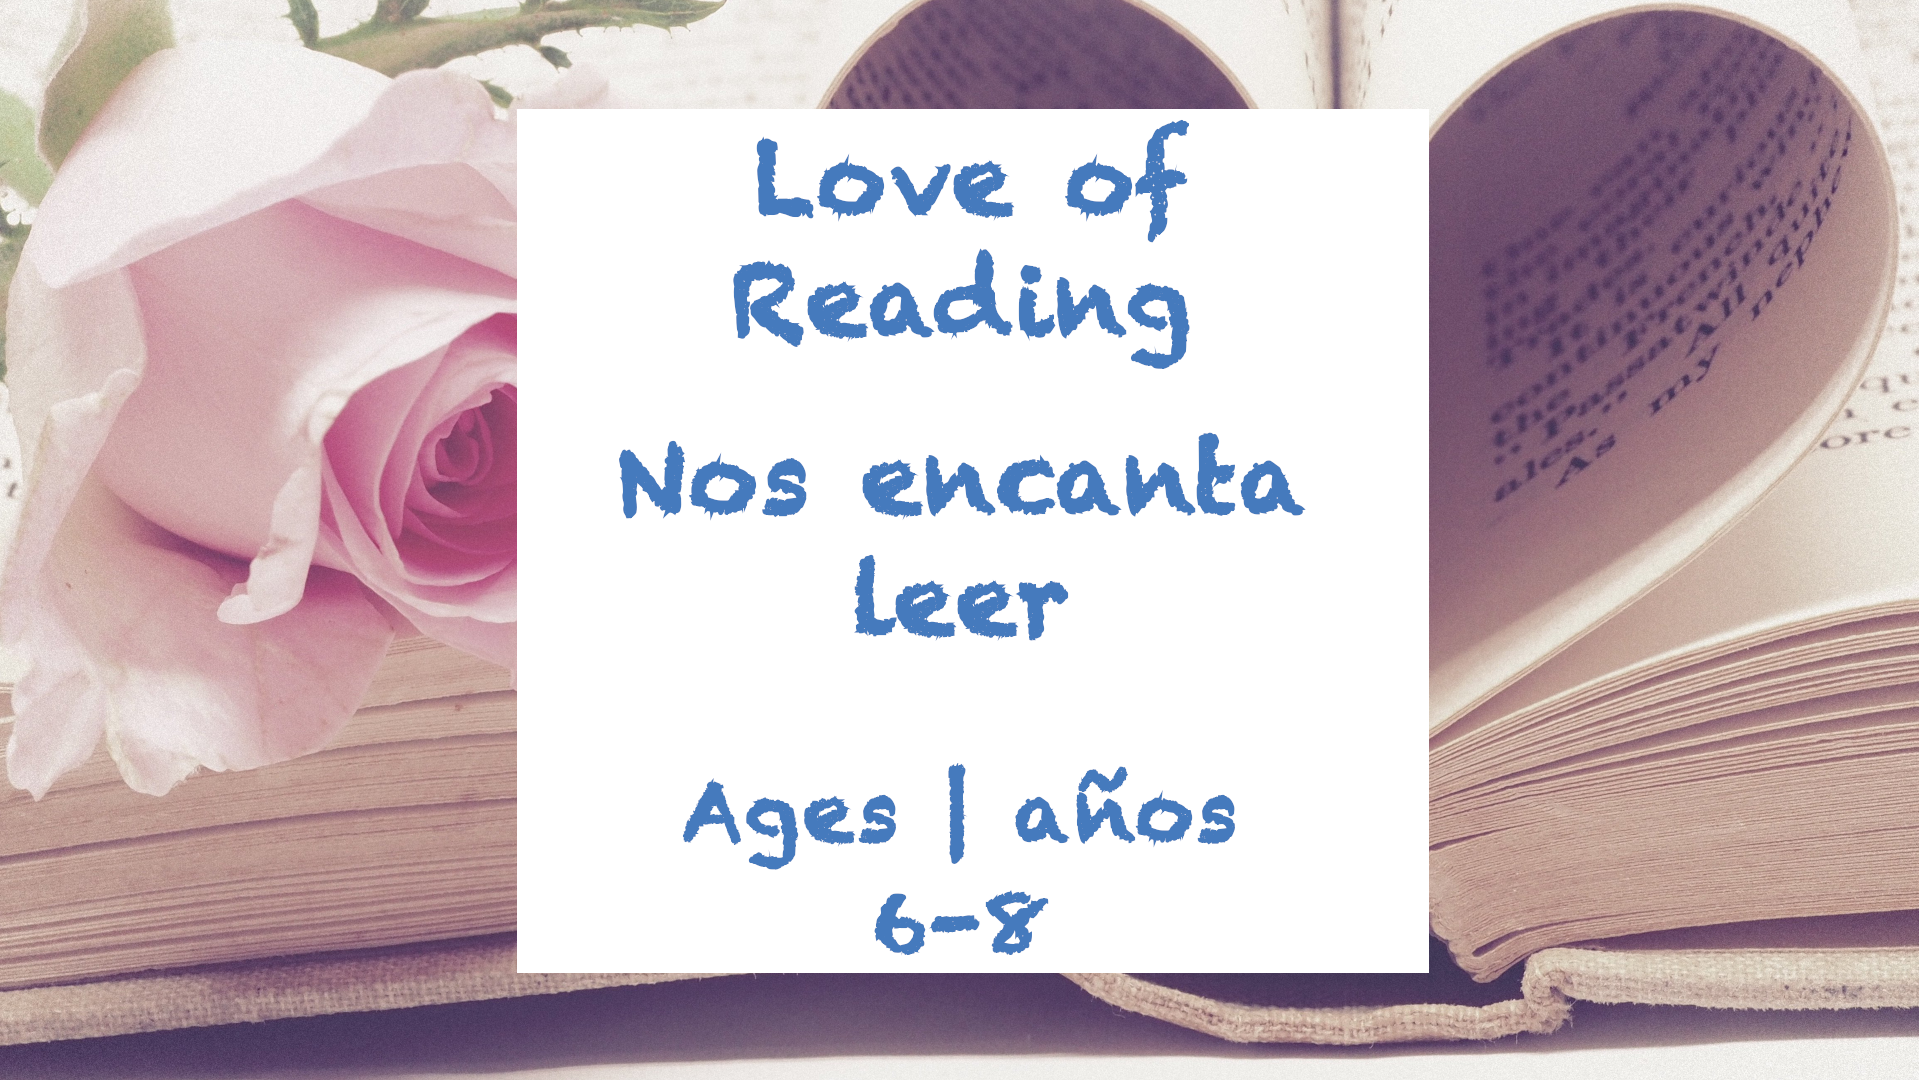 Love of Reading for 6-8 year olds